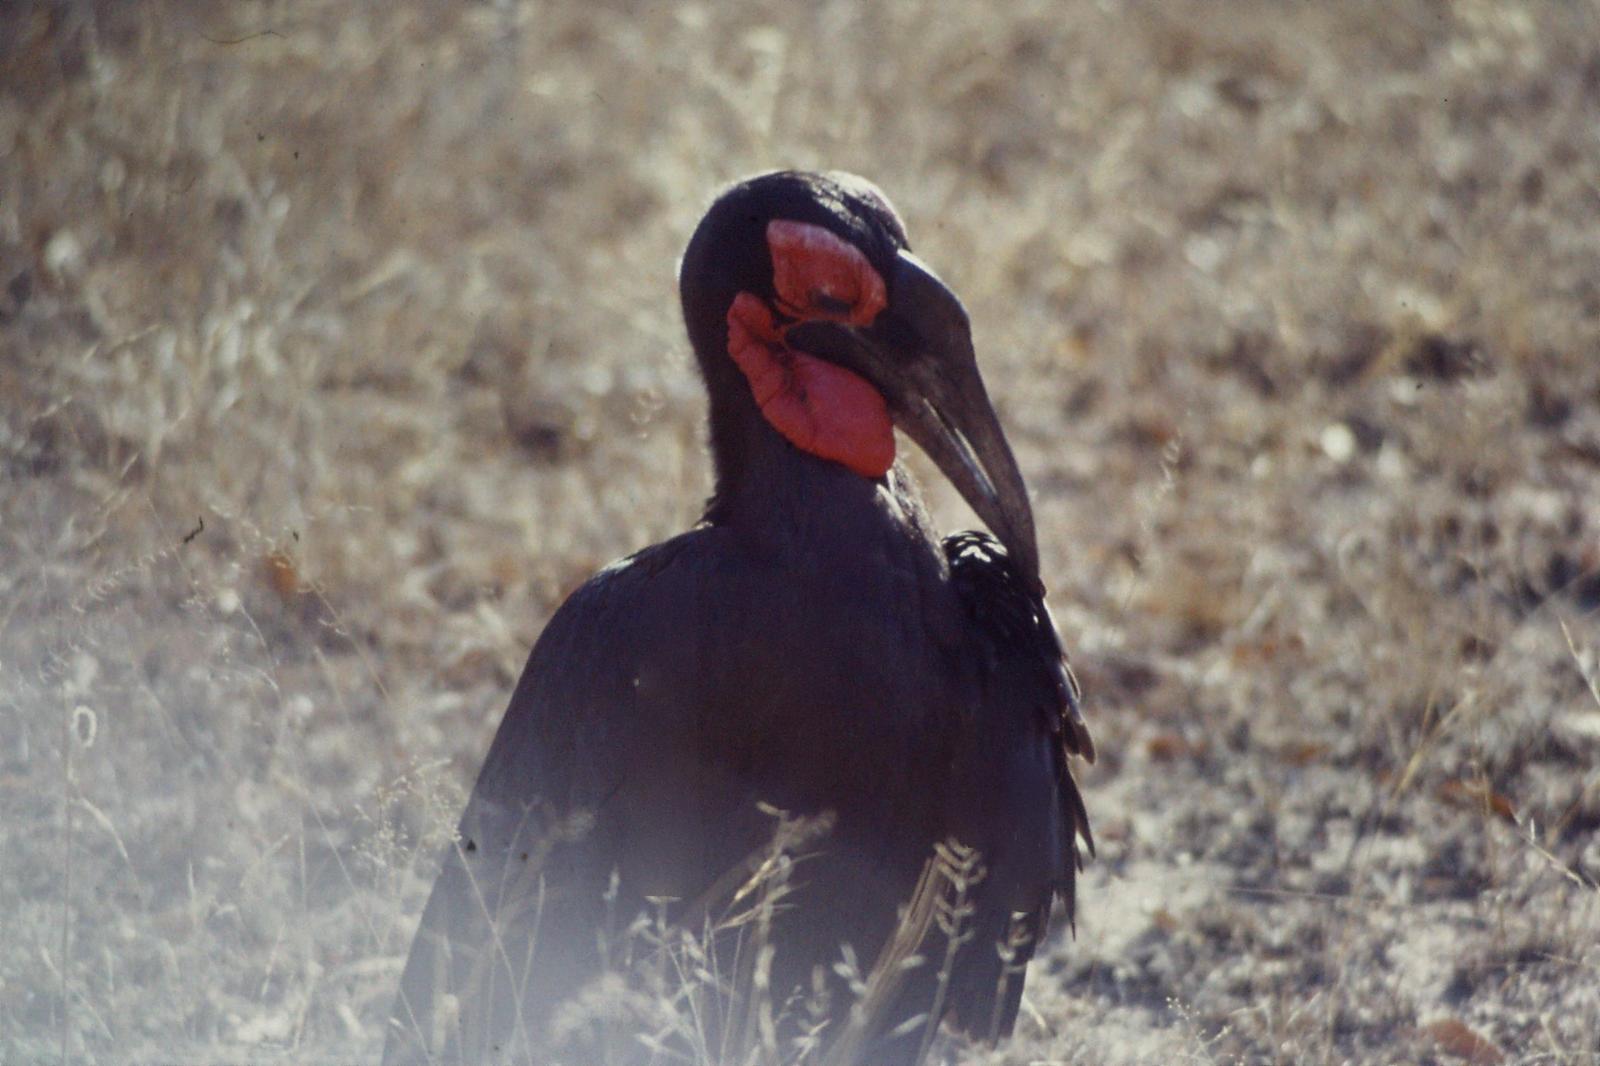 Southern Ground-Hornbill Photo by Peter Lowe